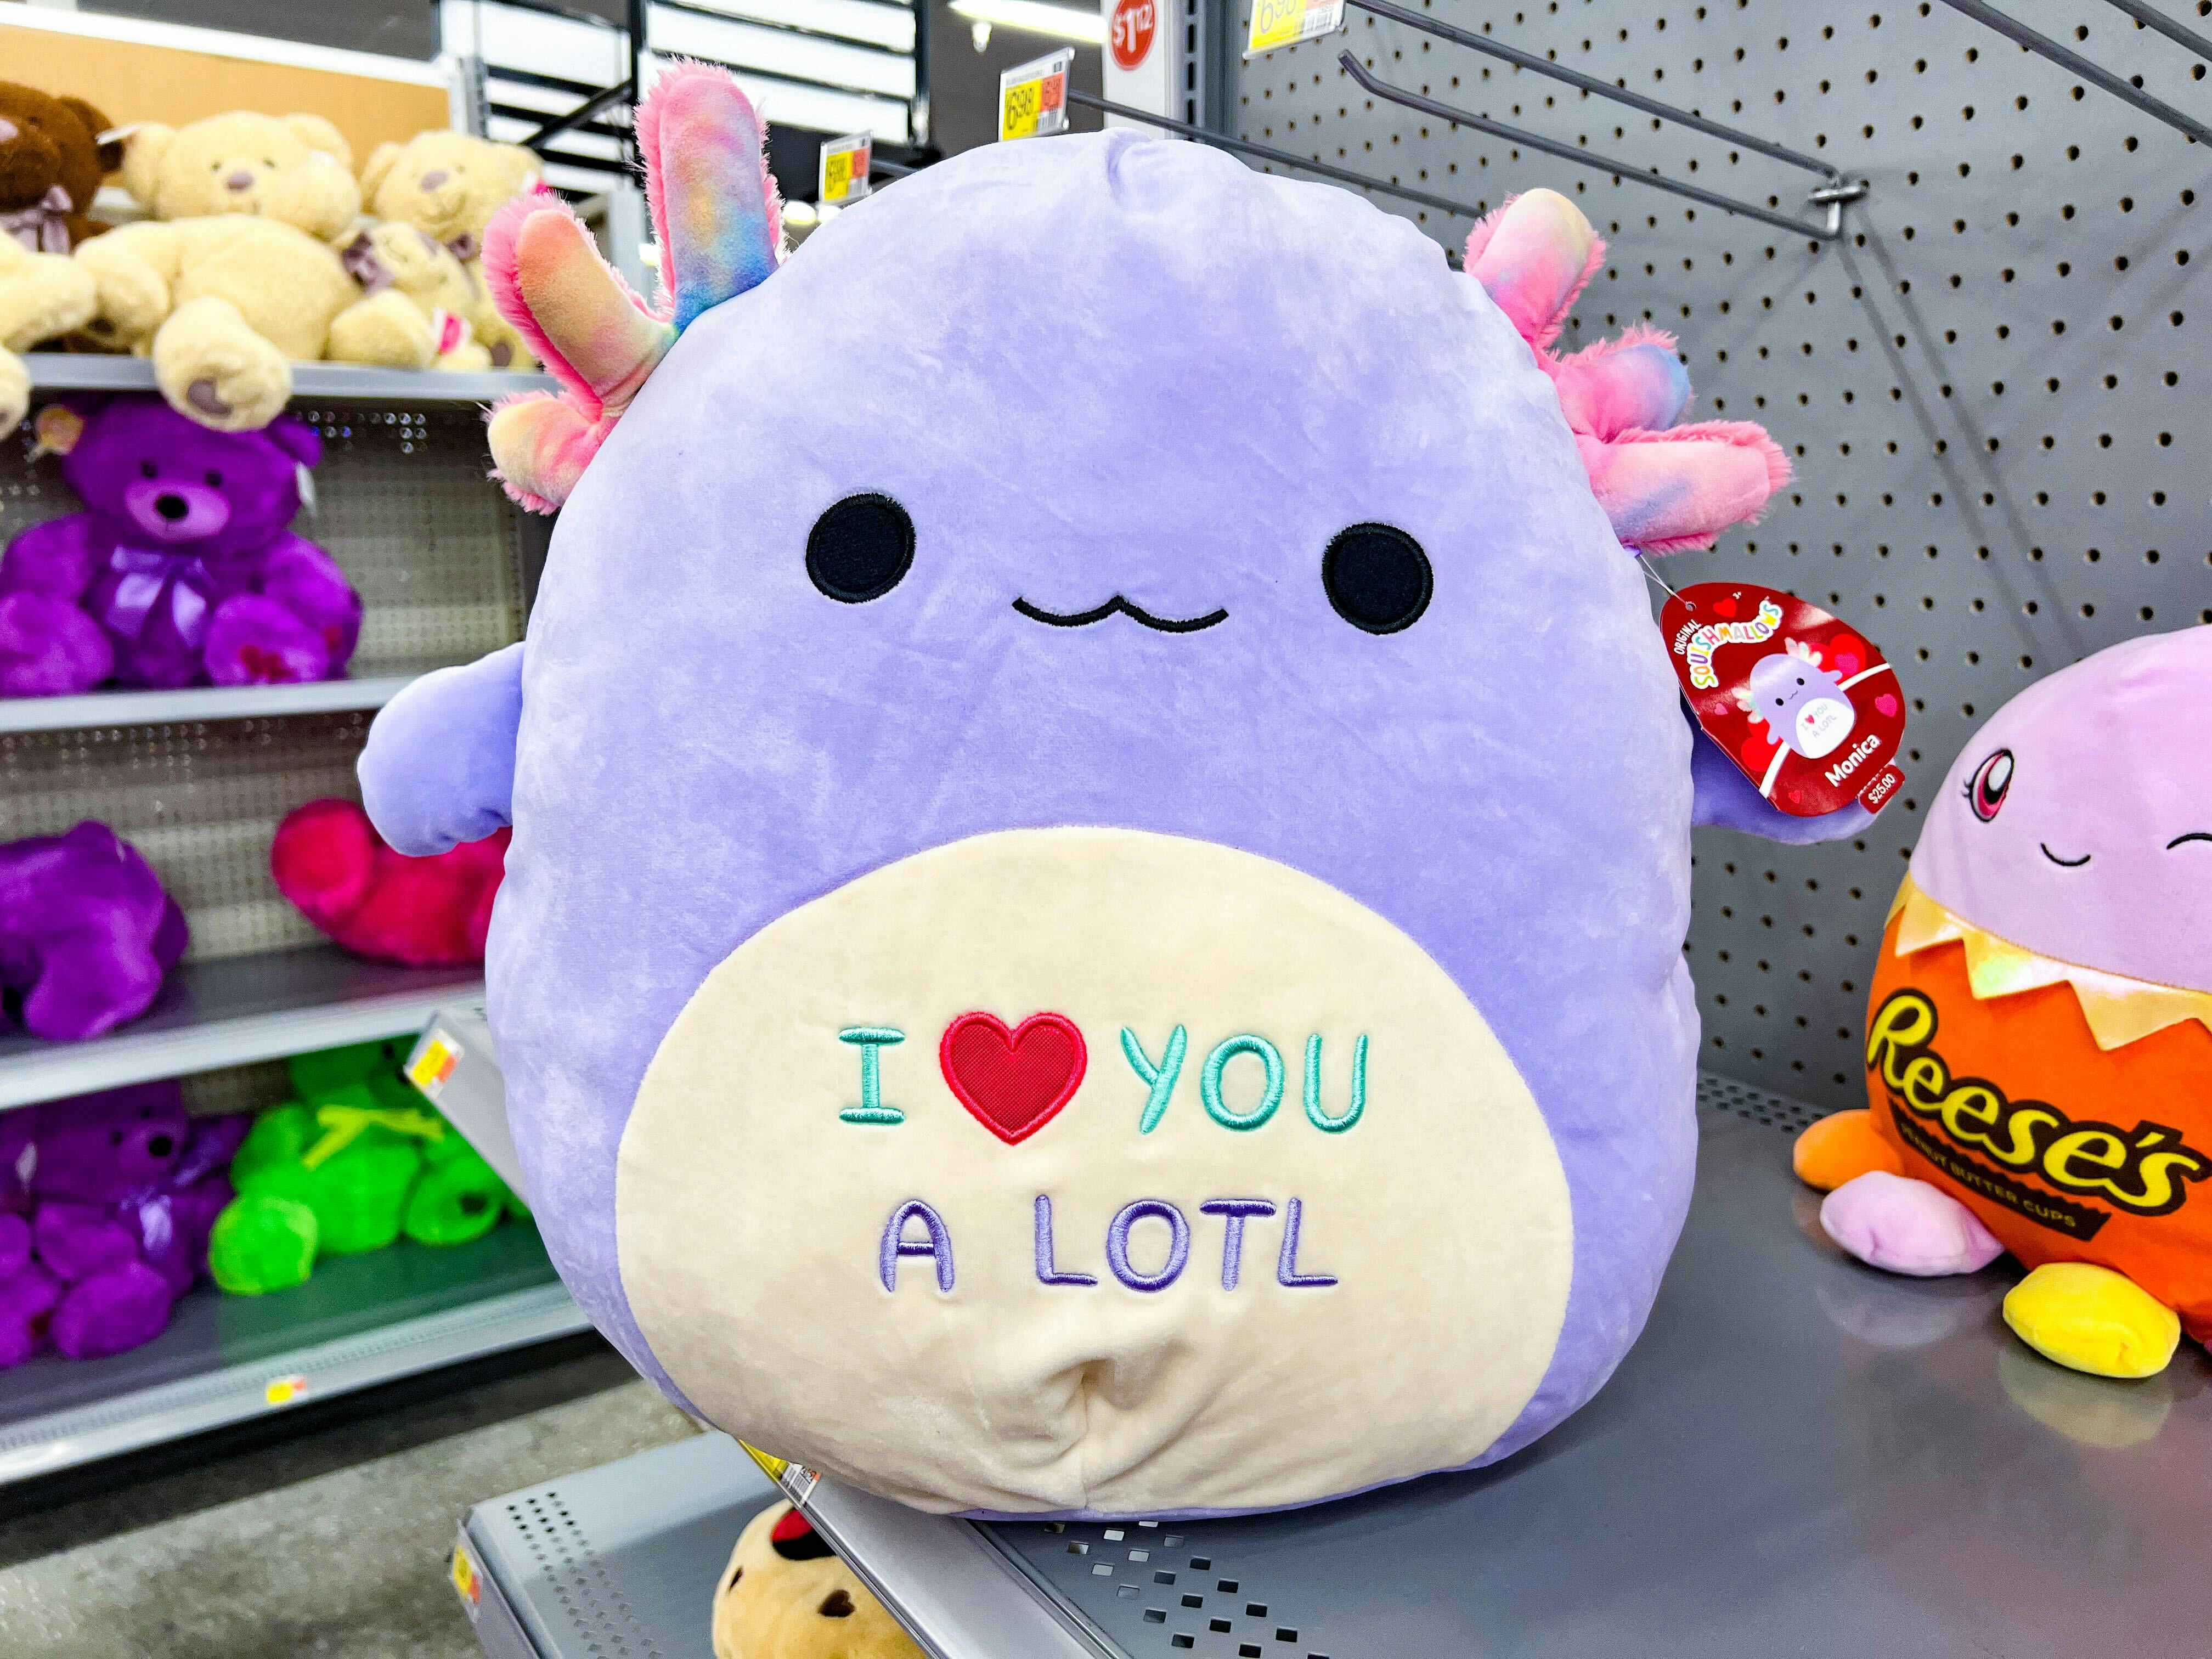 A Valentine's Day Monica Axolotl Squishmallow that says "I love you a lotl" on the tummy